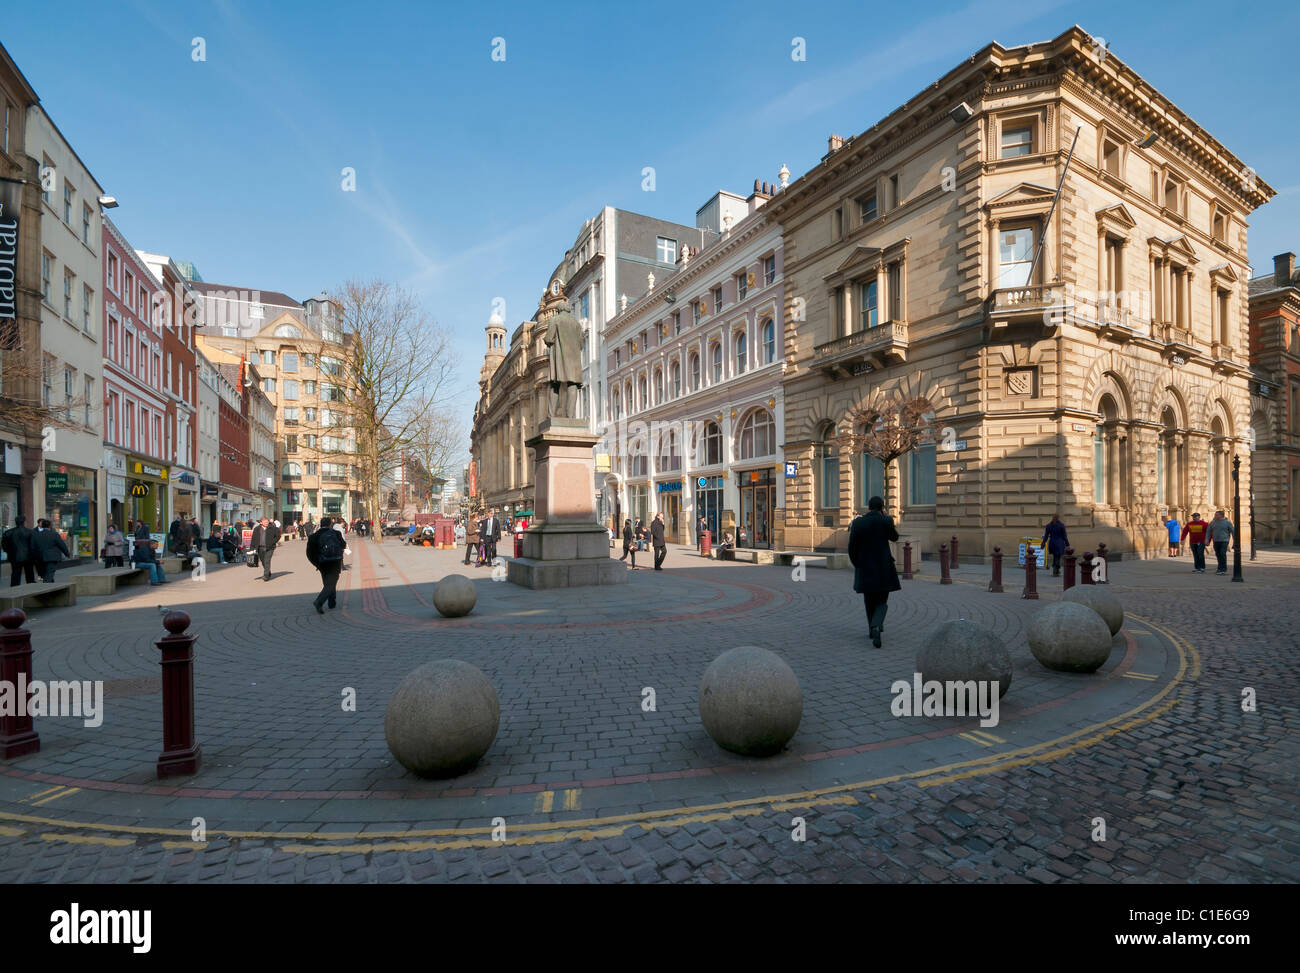 St Ann's Square Manchester Inghilterra England Foto Stock